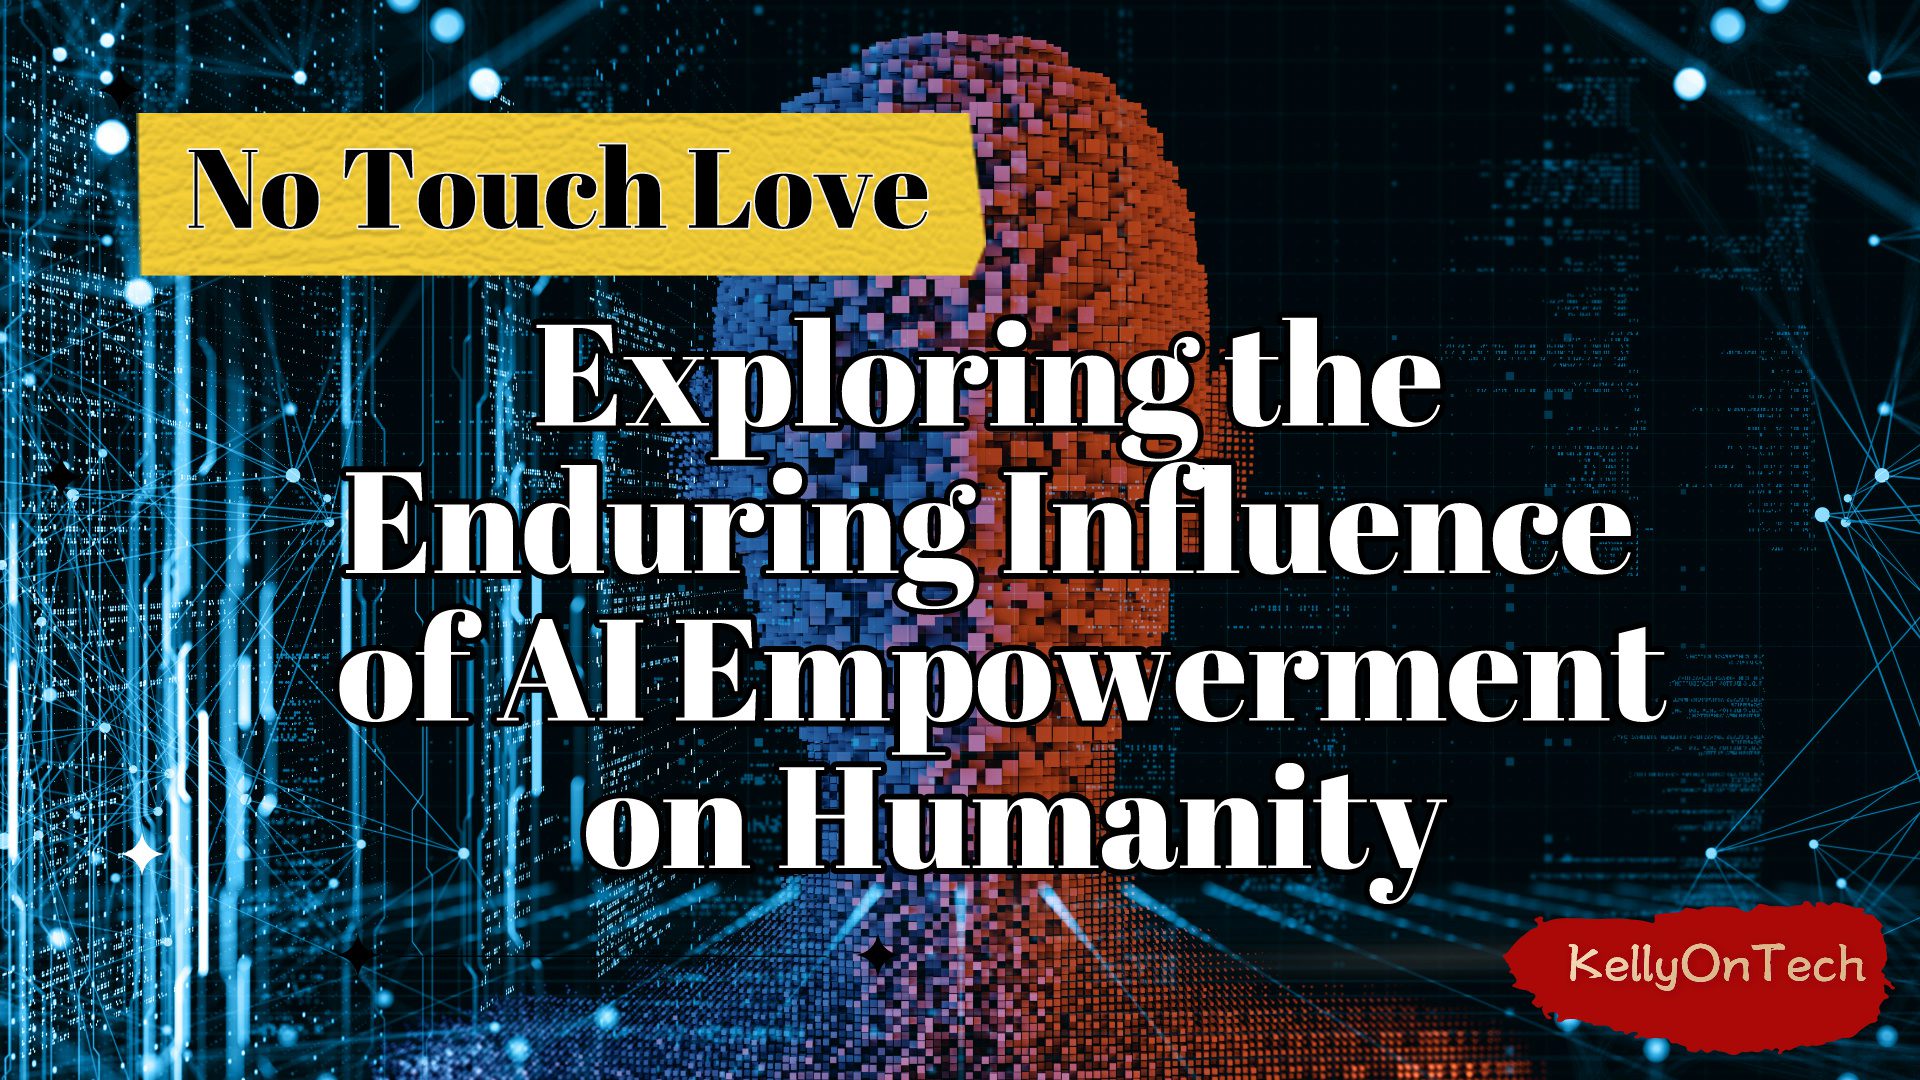 No Touch Love: Exploring The Enduring Influence of AI empowerment on humanity KellyOnTech